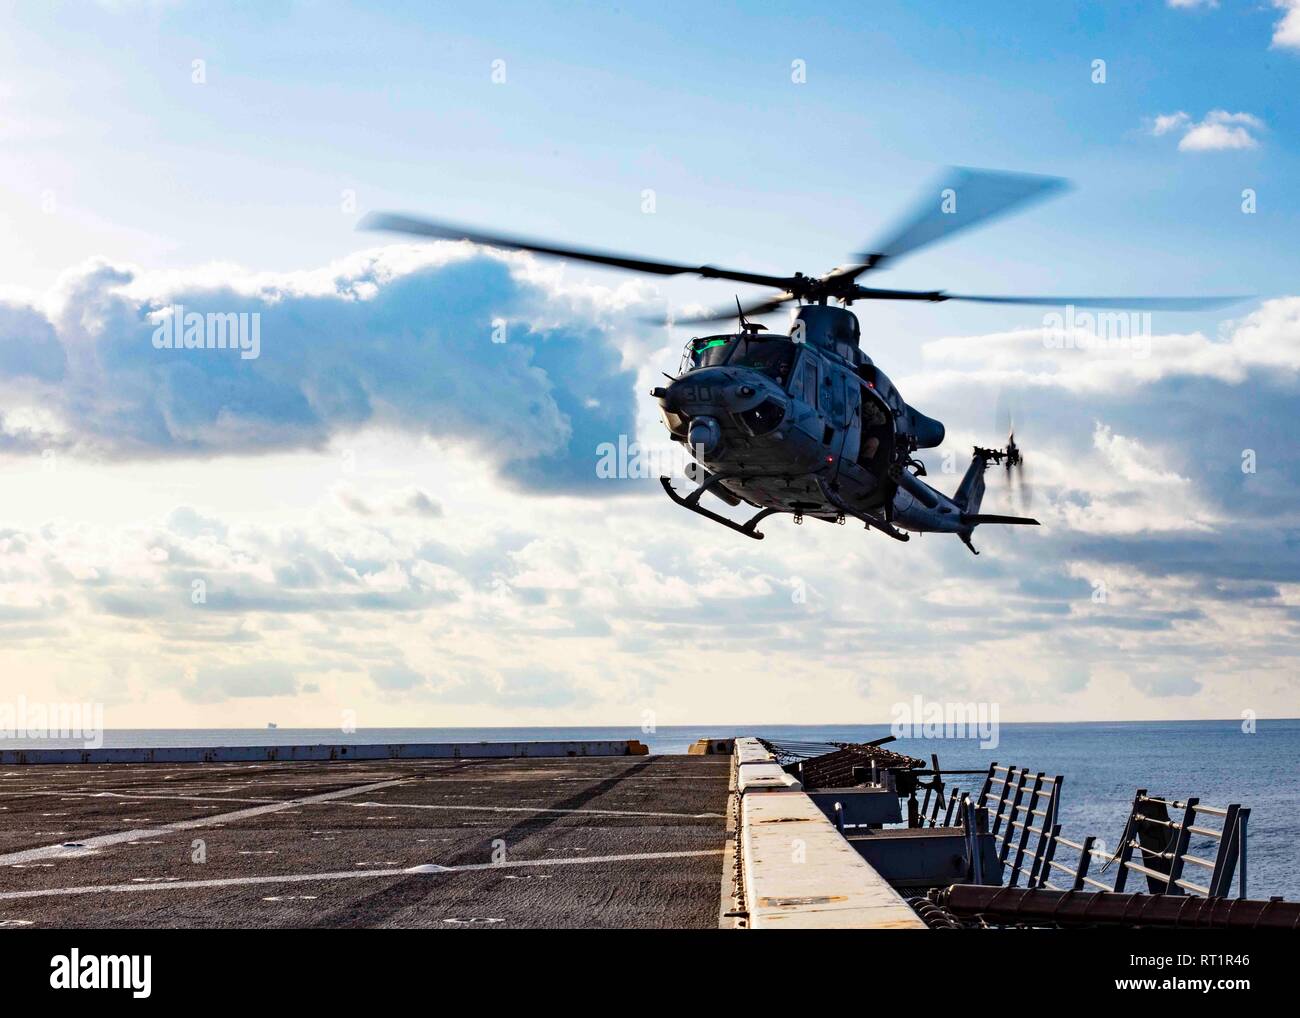 190221-N-HG389-0084 MEDITERRANEAN SEA (Feb. 21, 2019) A UH-1Y Huey helicopter assigned to the “Black Knights” of Marine Medium Tiltrotor Squadron (VMM) 264 (Reinforced) prepares to land on the flight deck of the San Antonio-class amphibious transport dock ship USS Arlington (LPD 24), Feb. 21, 2019. Arlington is on a scheduled deployment as part of the Kearsarge Amphibious Ready Group in support of maritime security operations, crisis response and theater security cooperation, while also providing a forward naval presence. (U.S. Navy photo by Mass Communication Specialist 2nd Class Brandon Park Stock Photo